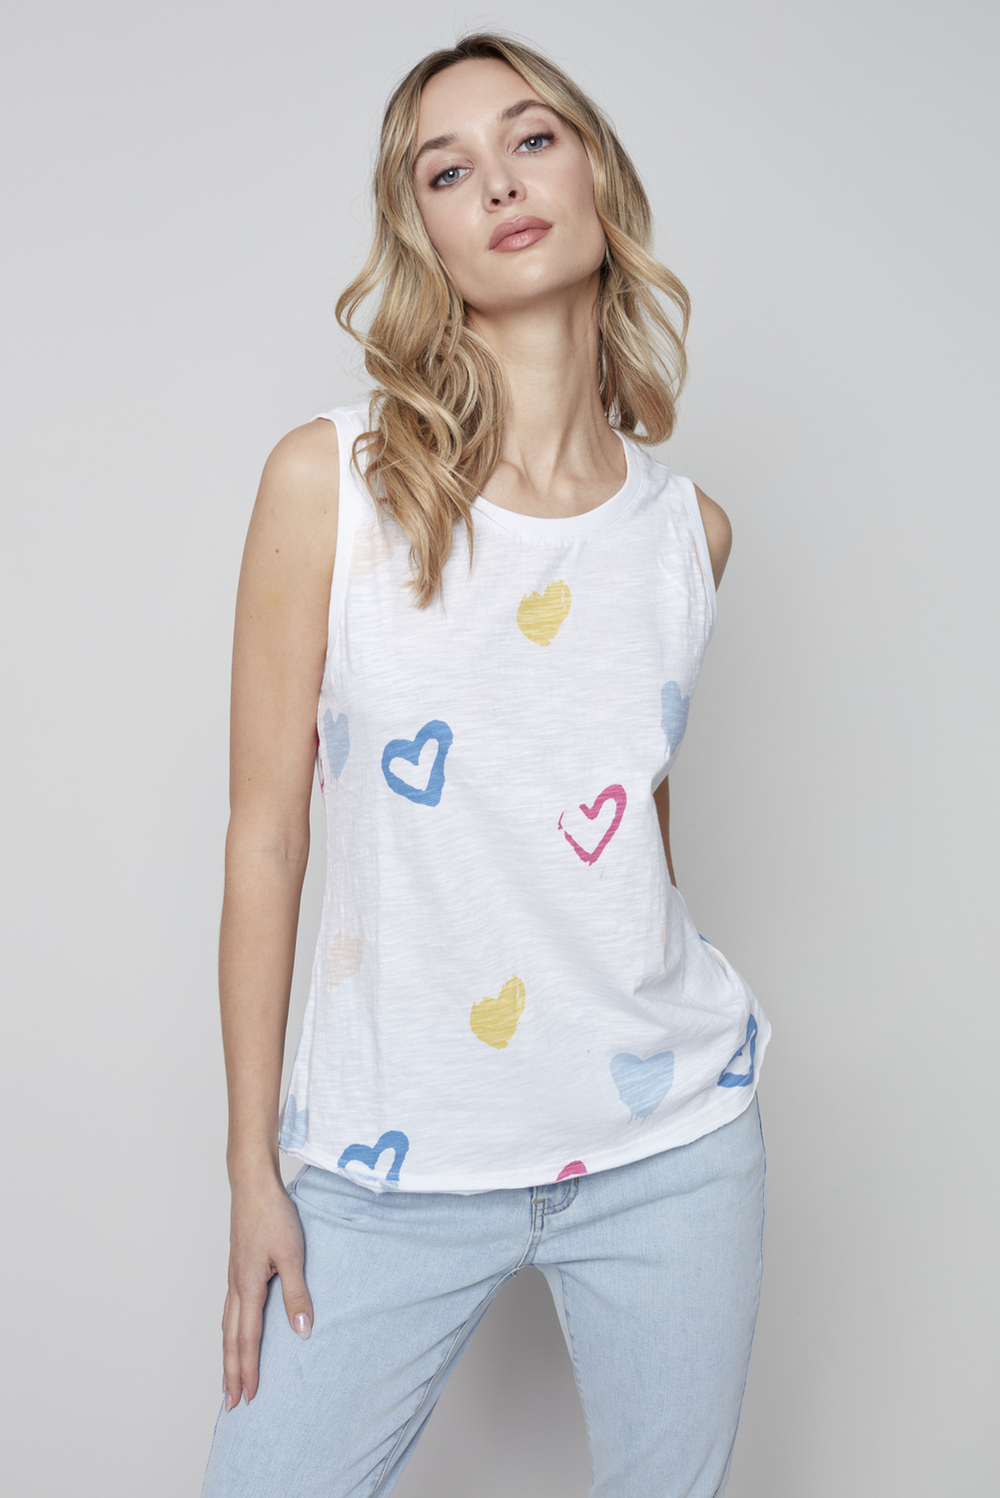 Printed Sleeveless Top Style C1313. Hearts